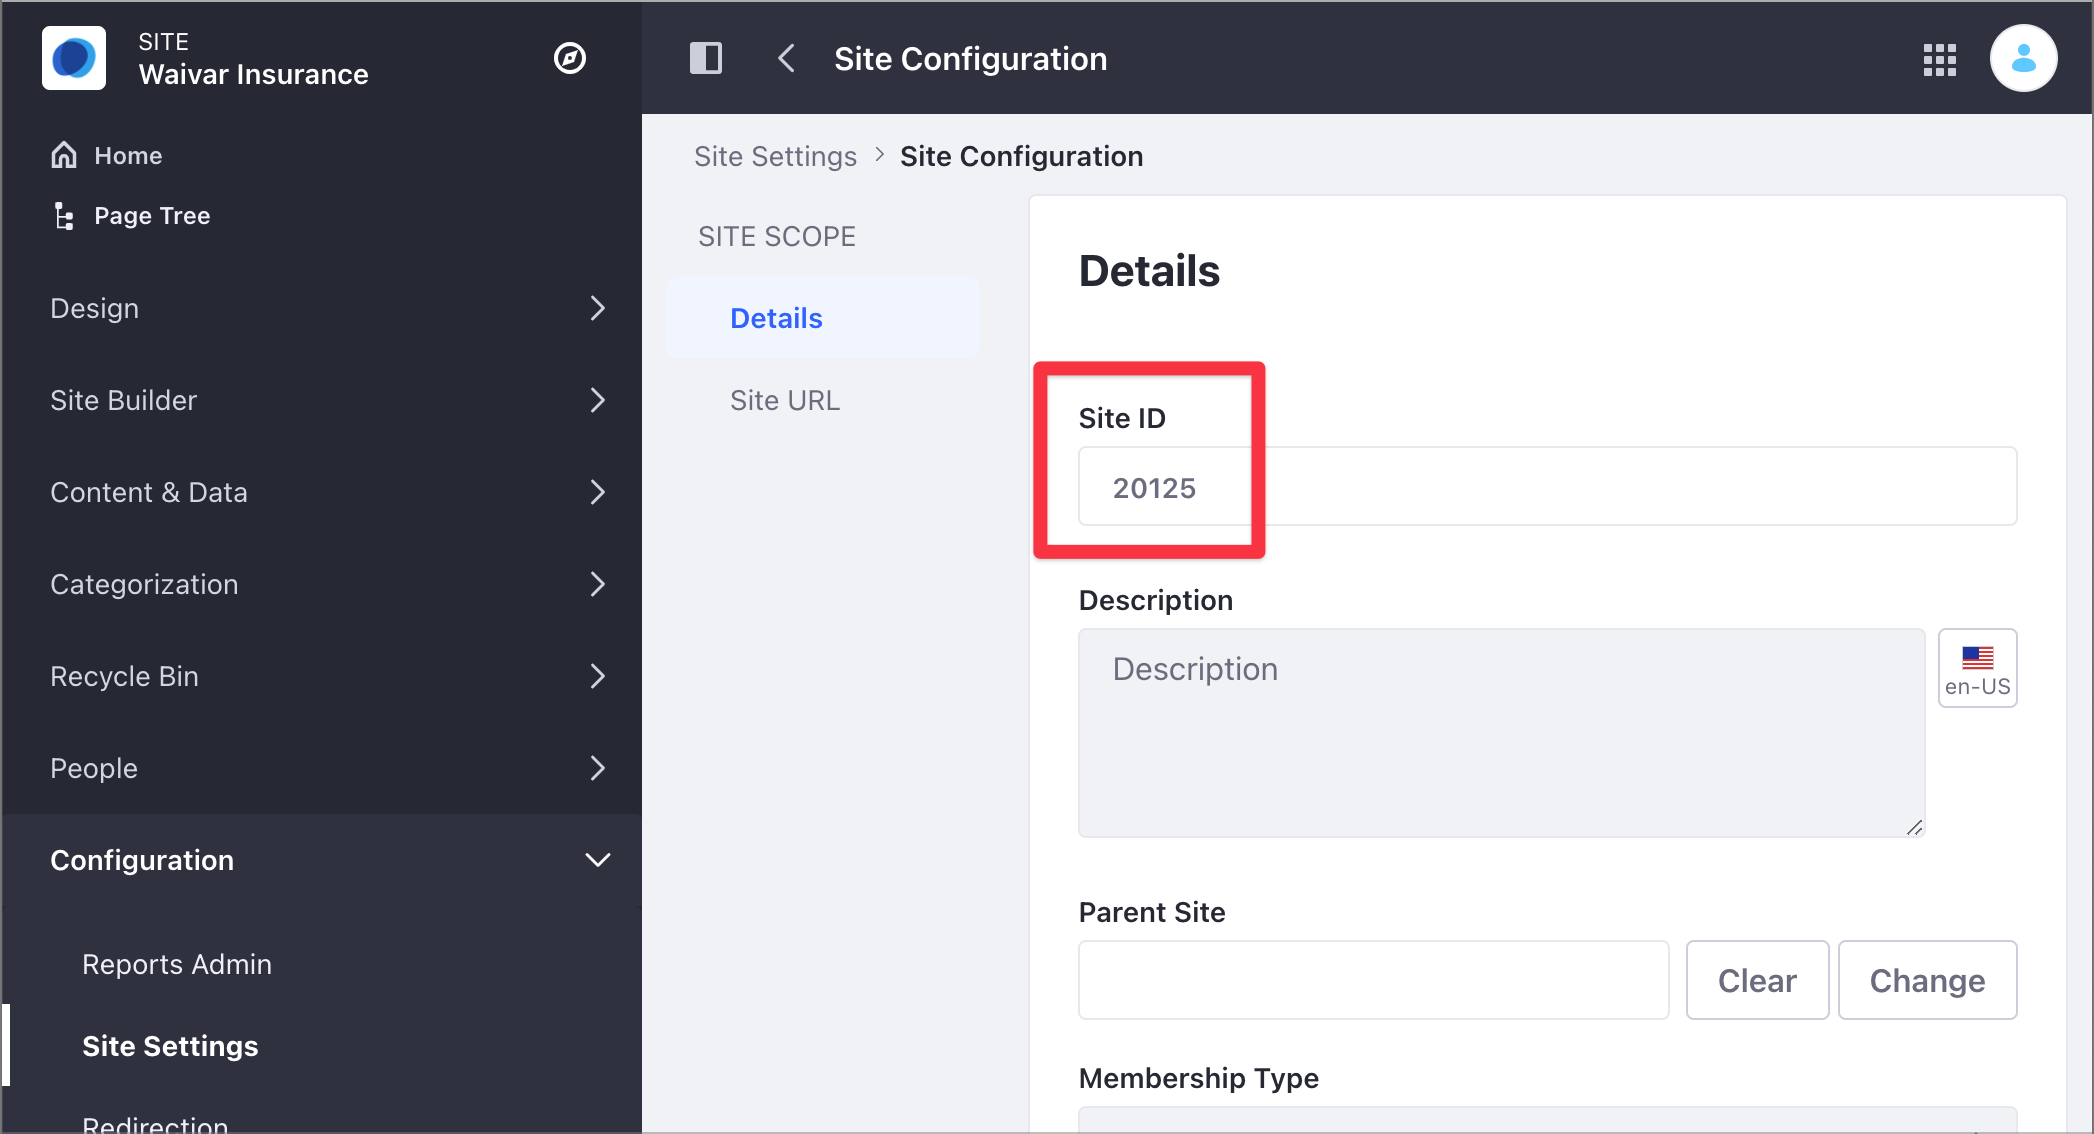 Identify the Site ID under the Site Settings and Site Configuration option.